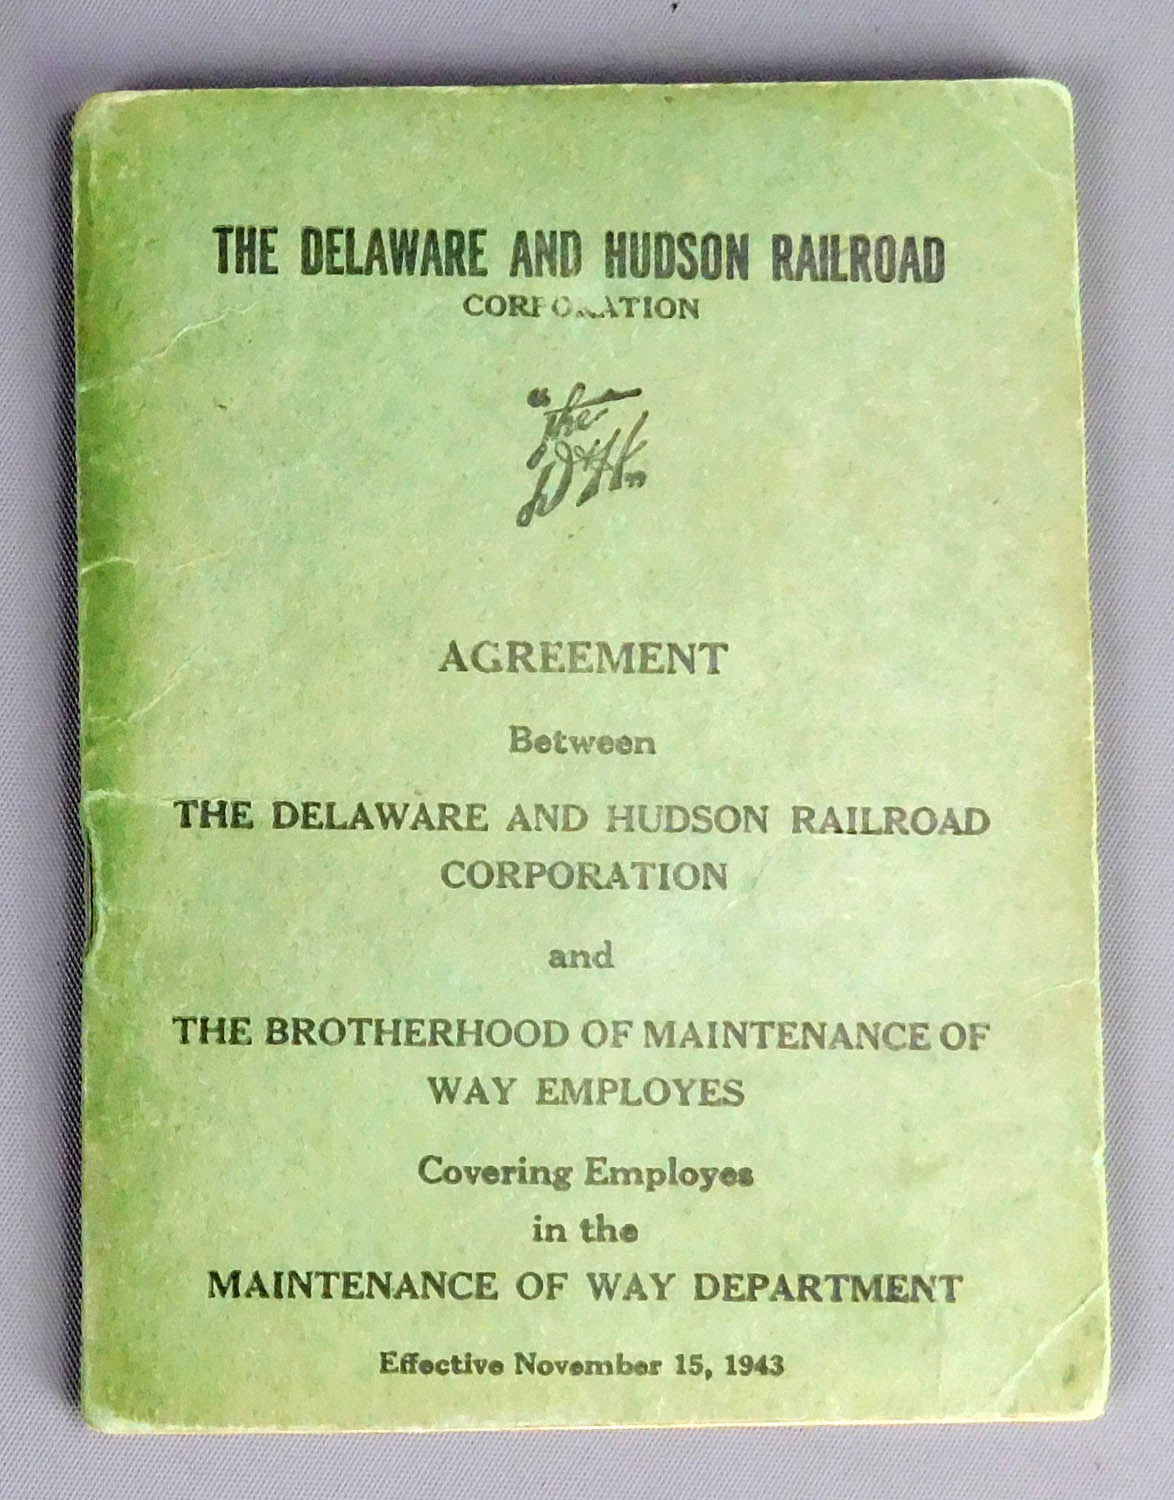 Agreement Between The Delaware and Hudson Railroad Corporation and Brotherhood of Maintenance of Way Employes